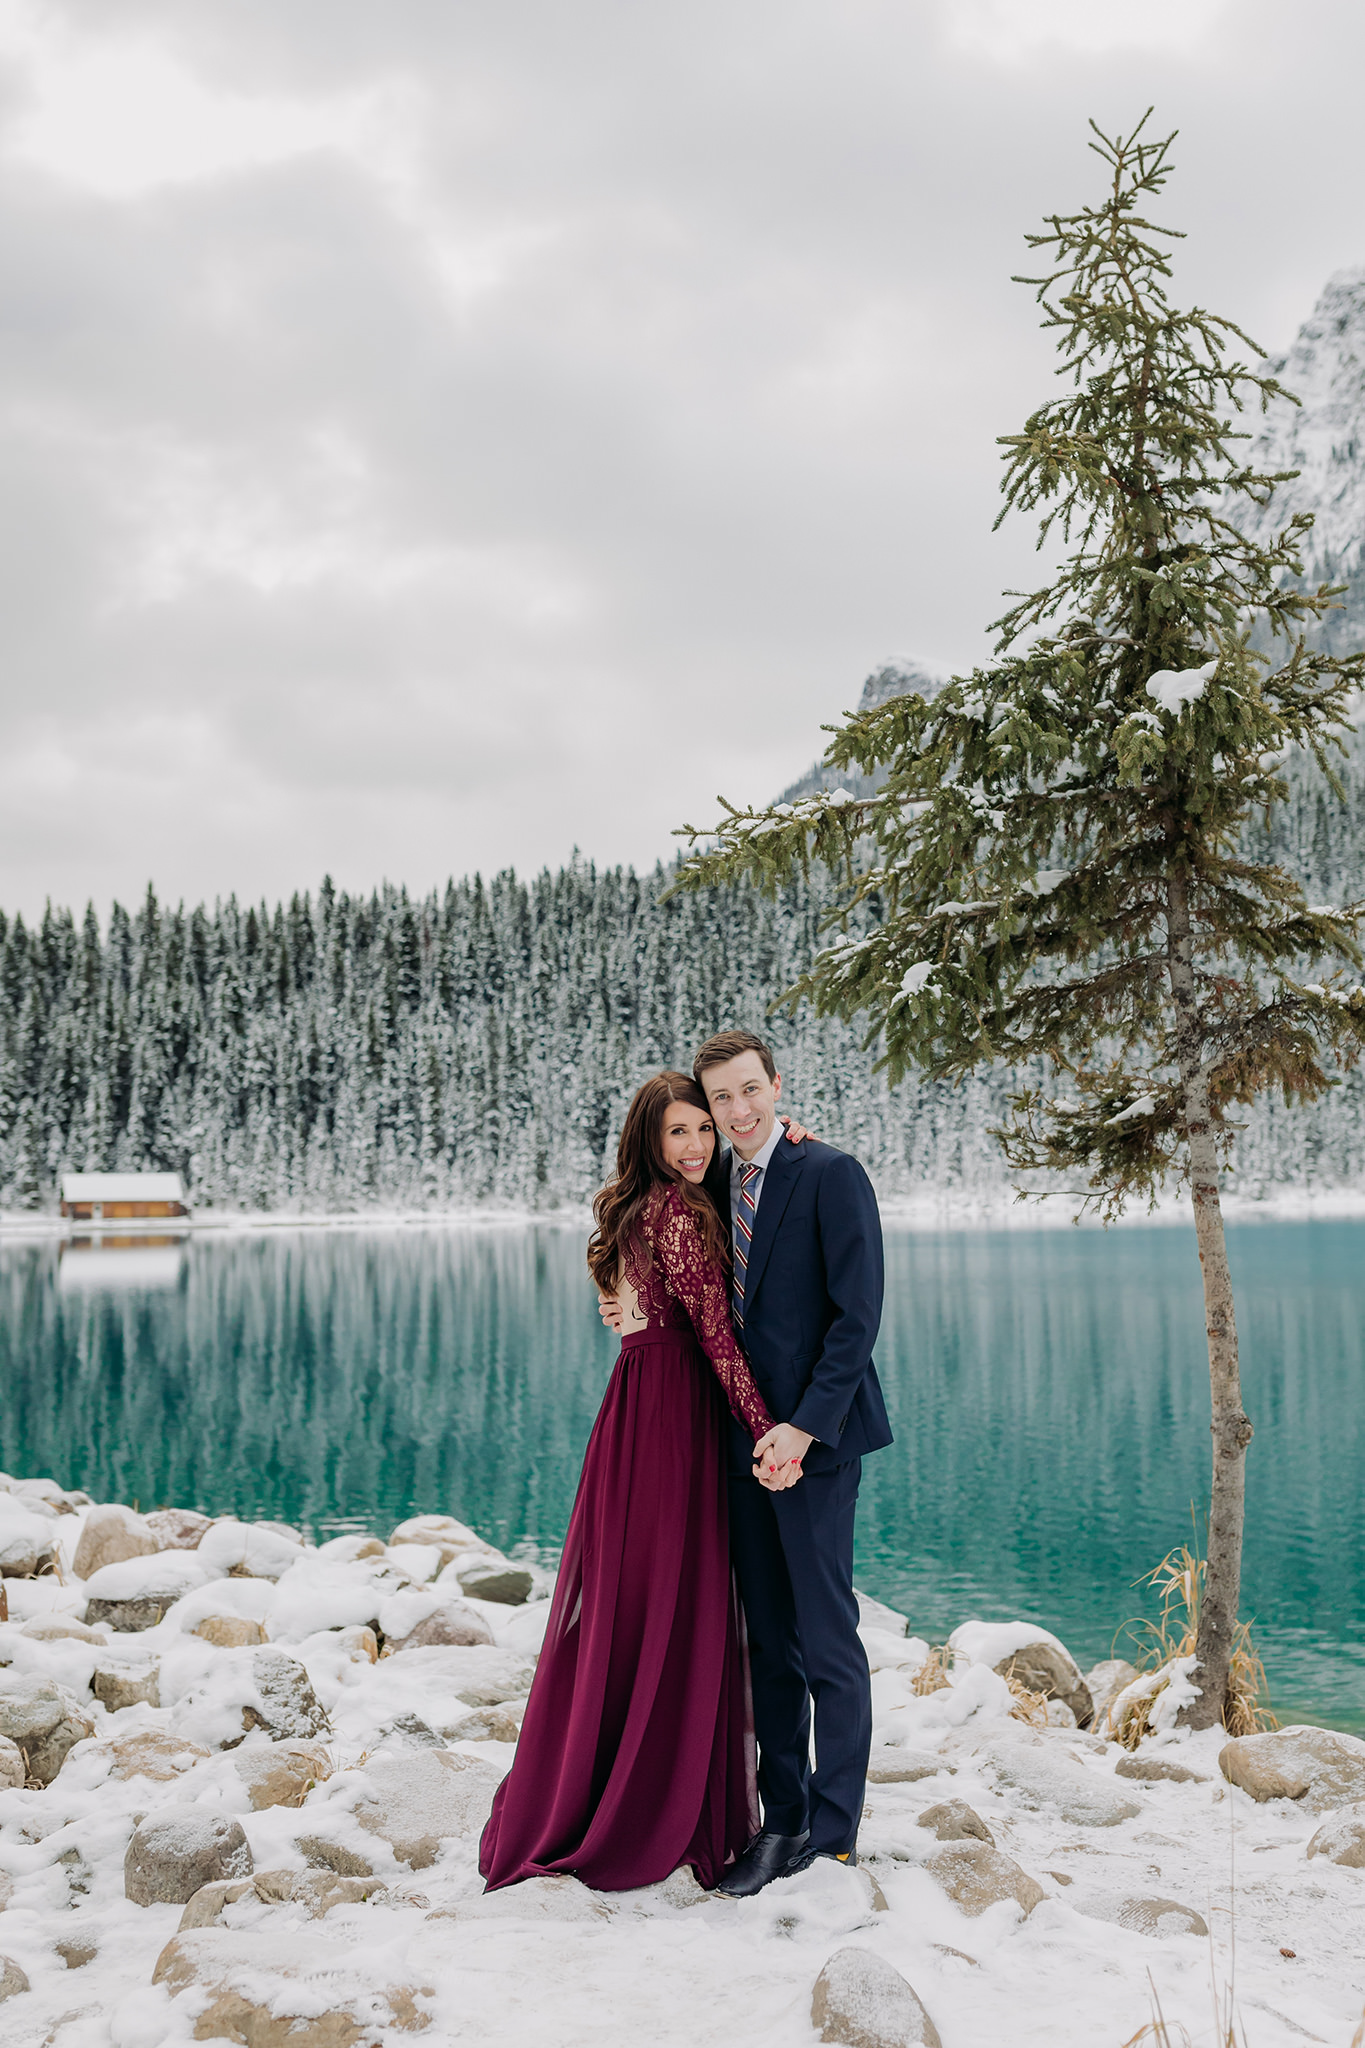 Lake Louise in October Magical SNowy formal mountain engagement photography session